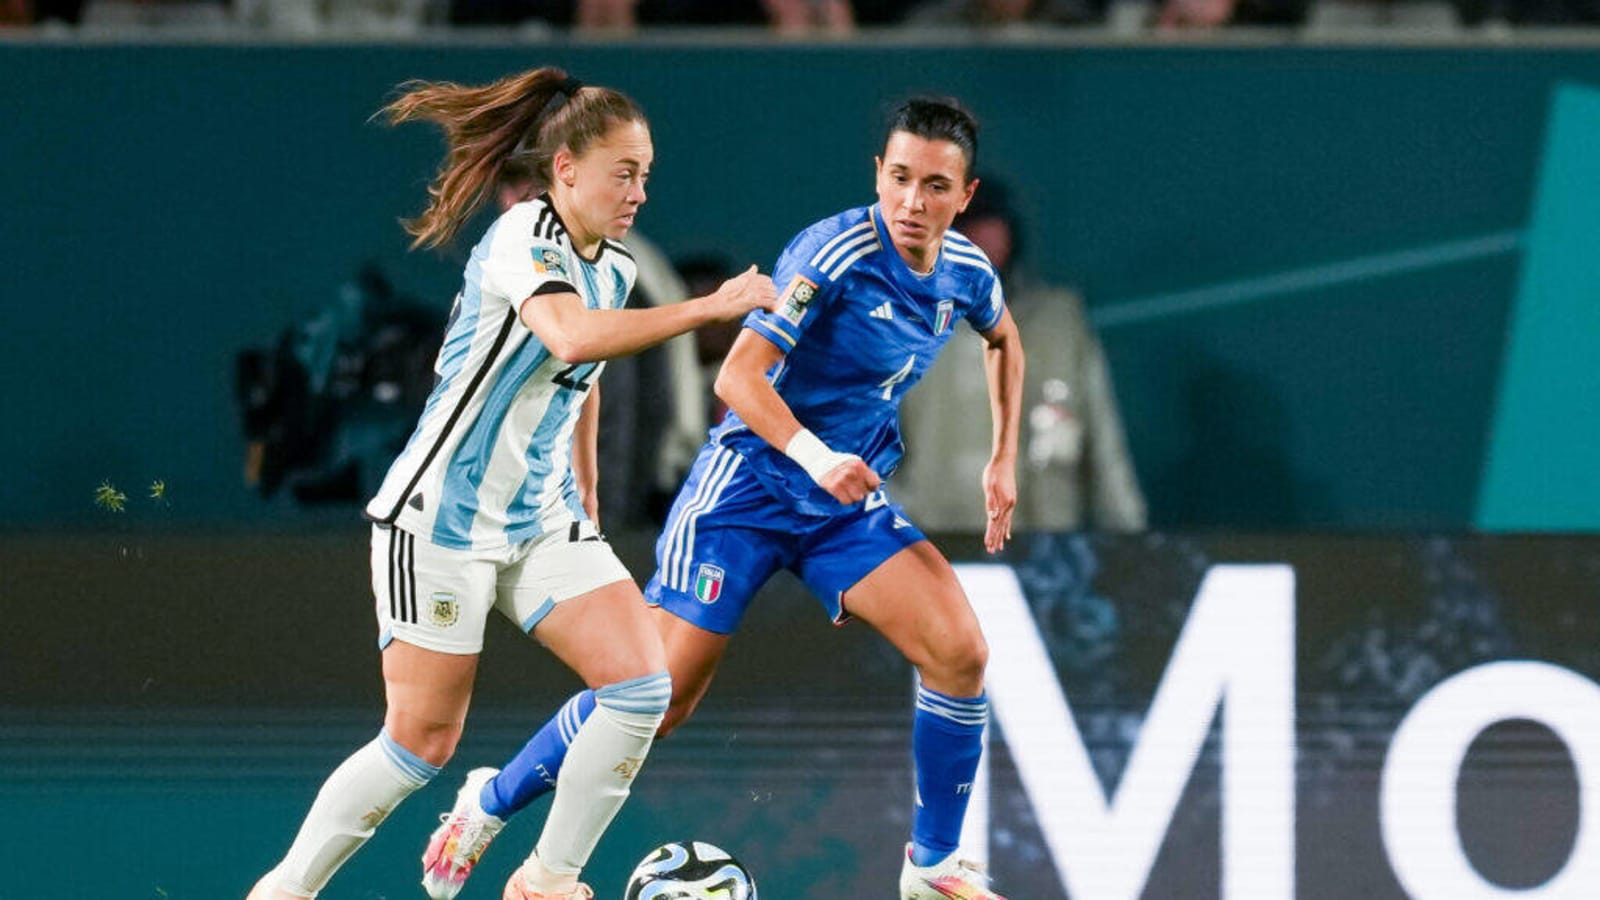 How to watch Argentina vs South Africa online free 2023 Womens World Cup live stream, start time, TV channel Yardbarker